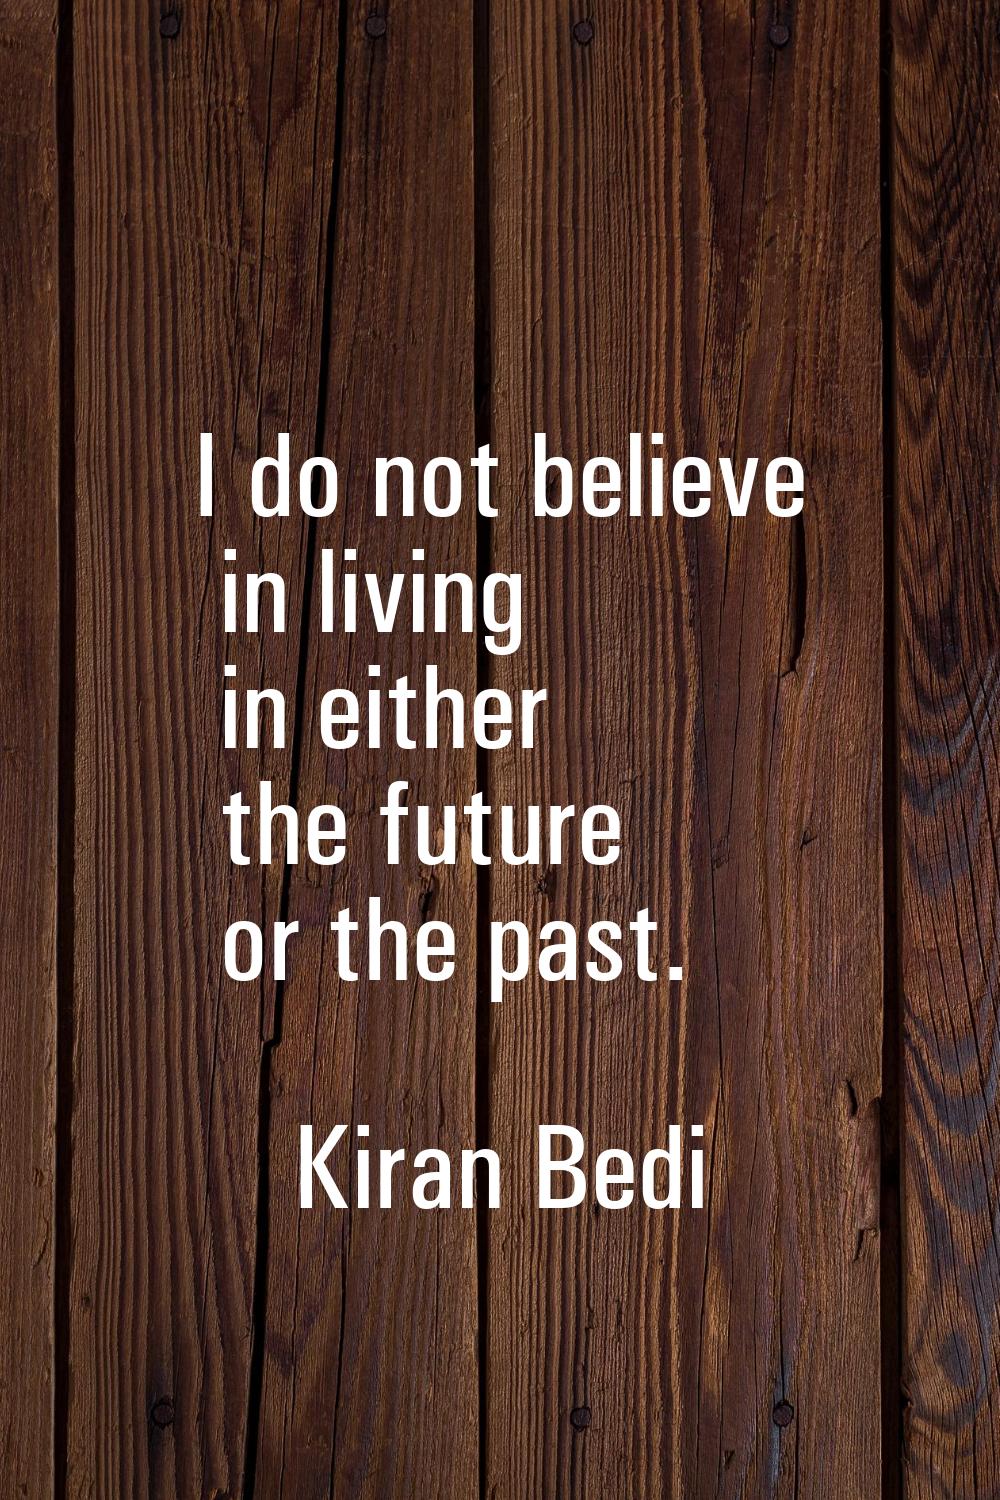 I do not believe in living in either the future or the past.